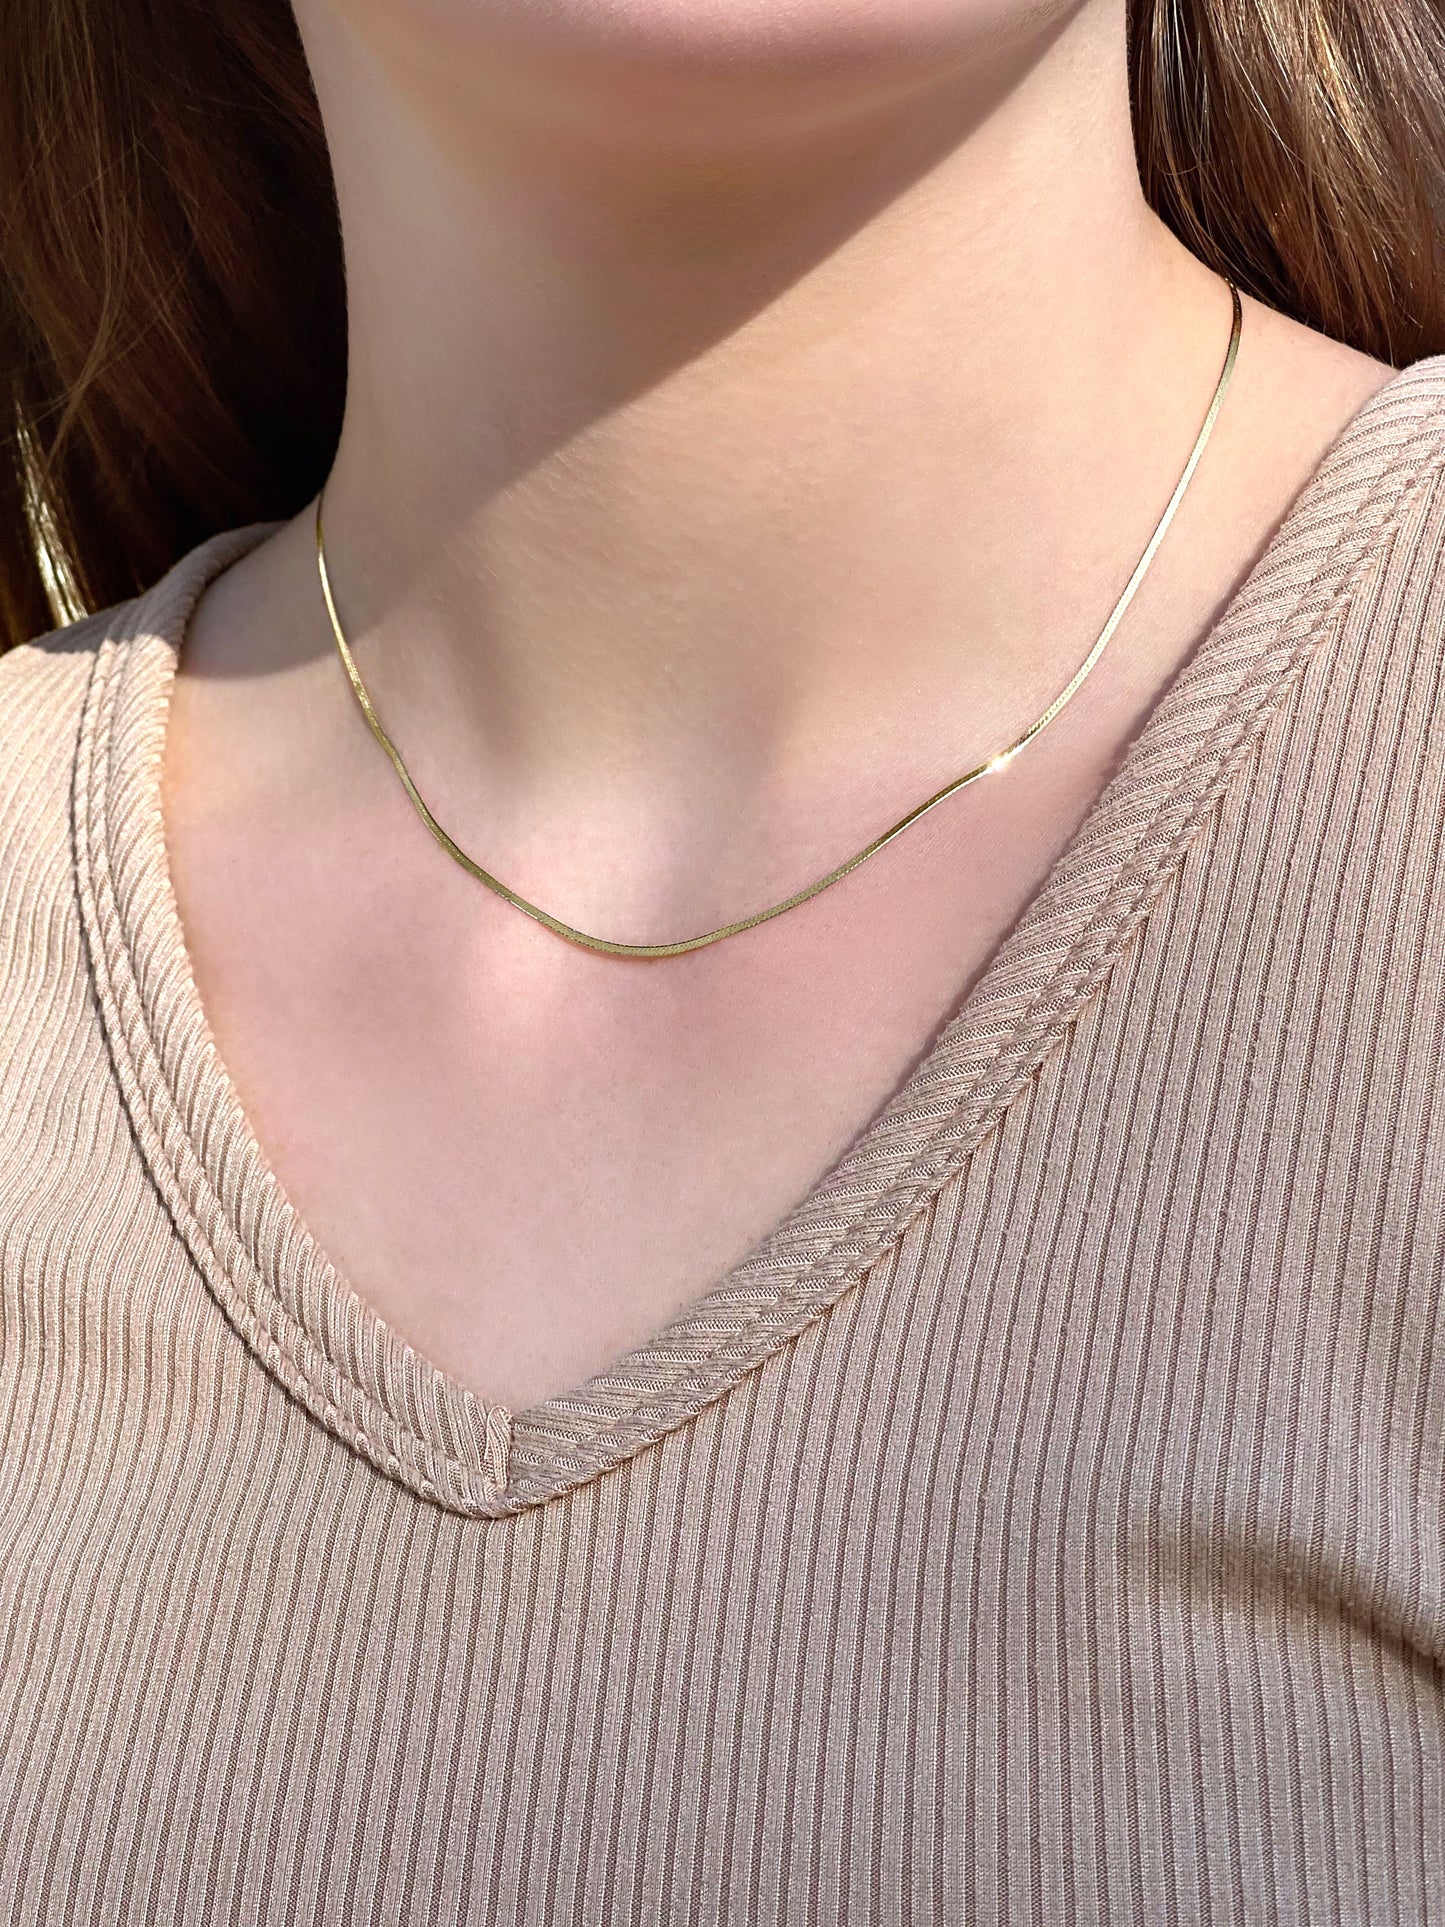 Sophia Thin Chain Necklace ( 18K solid gold )